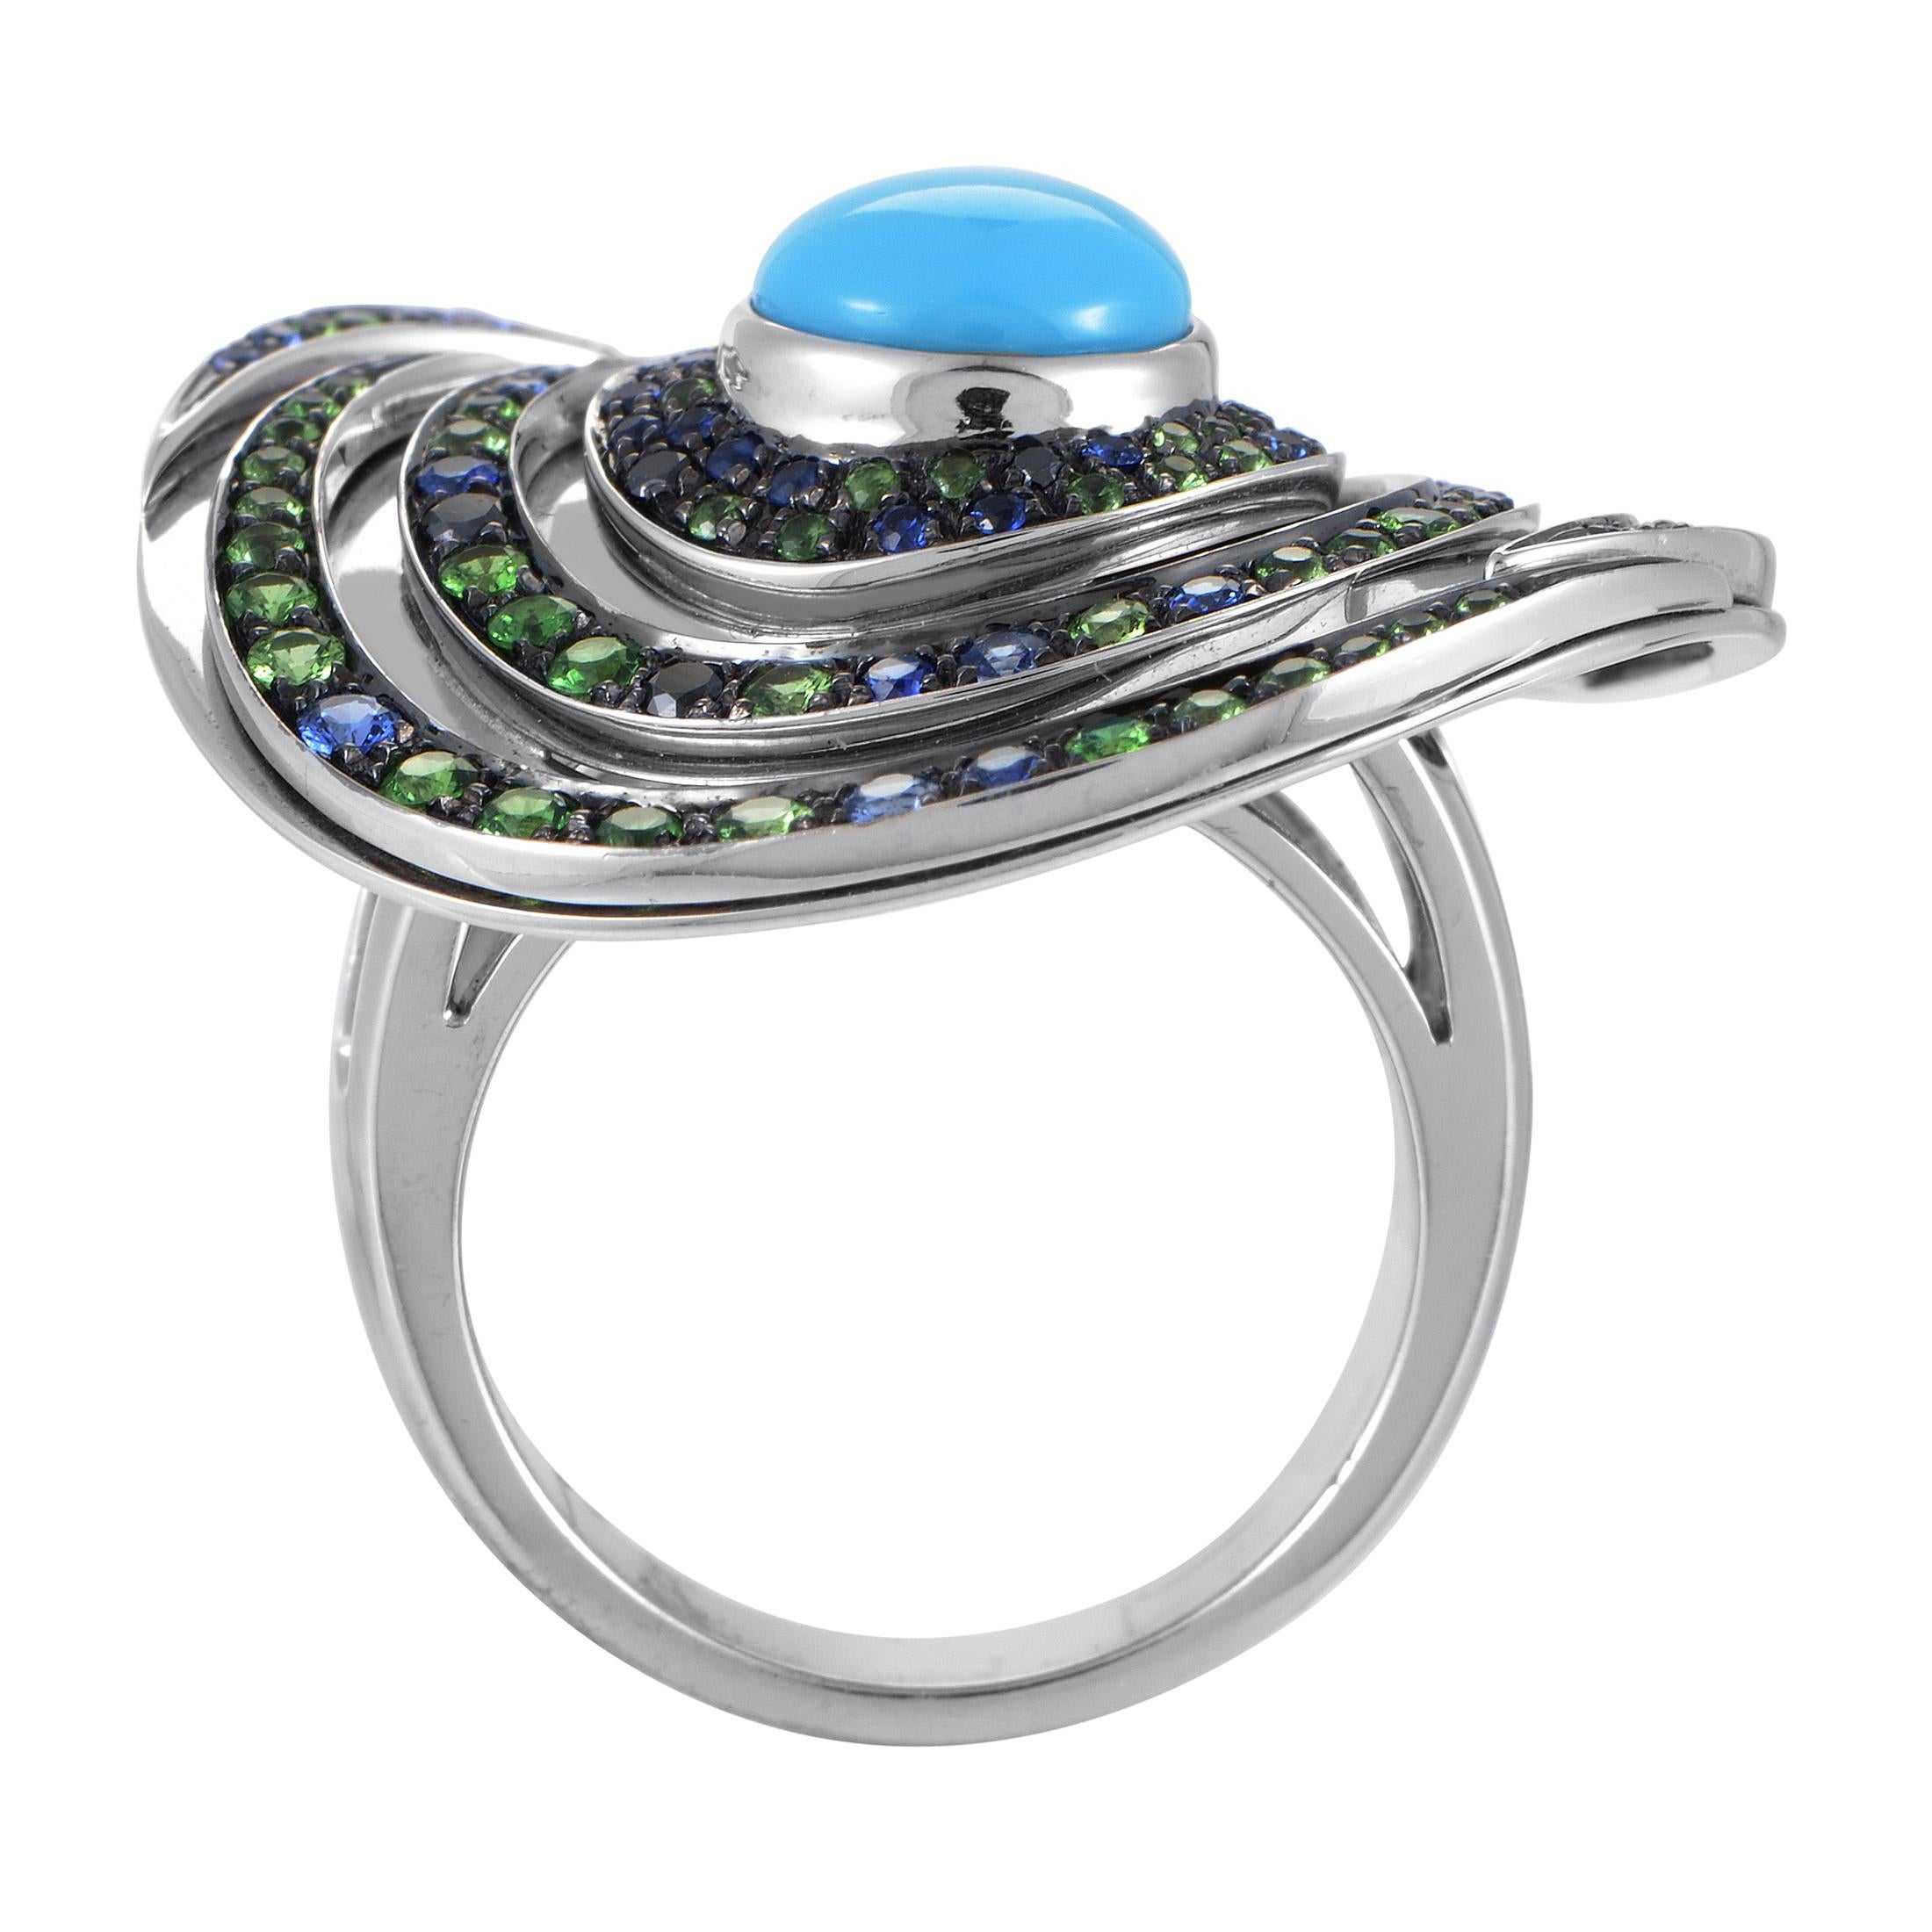 Designed in a spiraling and wonderfully crooked manner with a splendid turquoise stone set amidst a majestic arrangement of marvelous tsavorites and nifty sapphires, this astonishing 18K white gold ring from Boucheron is a fantastic sight to